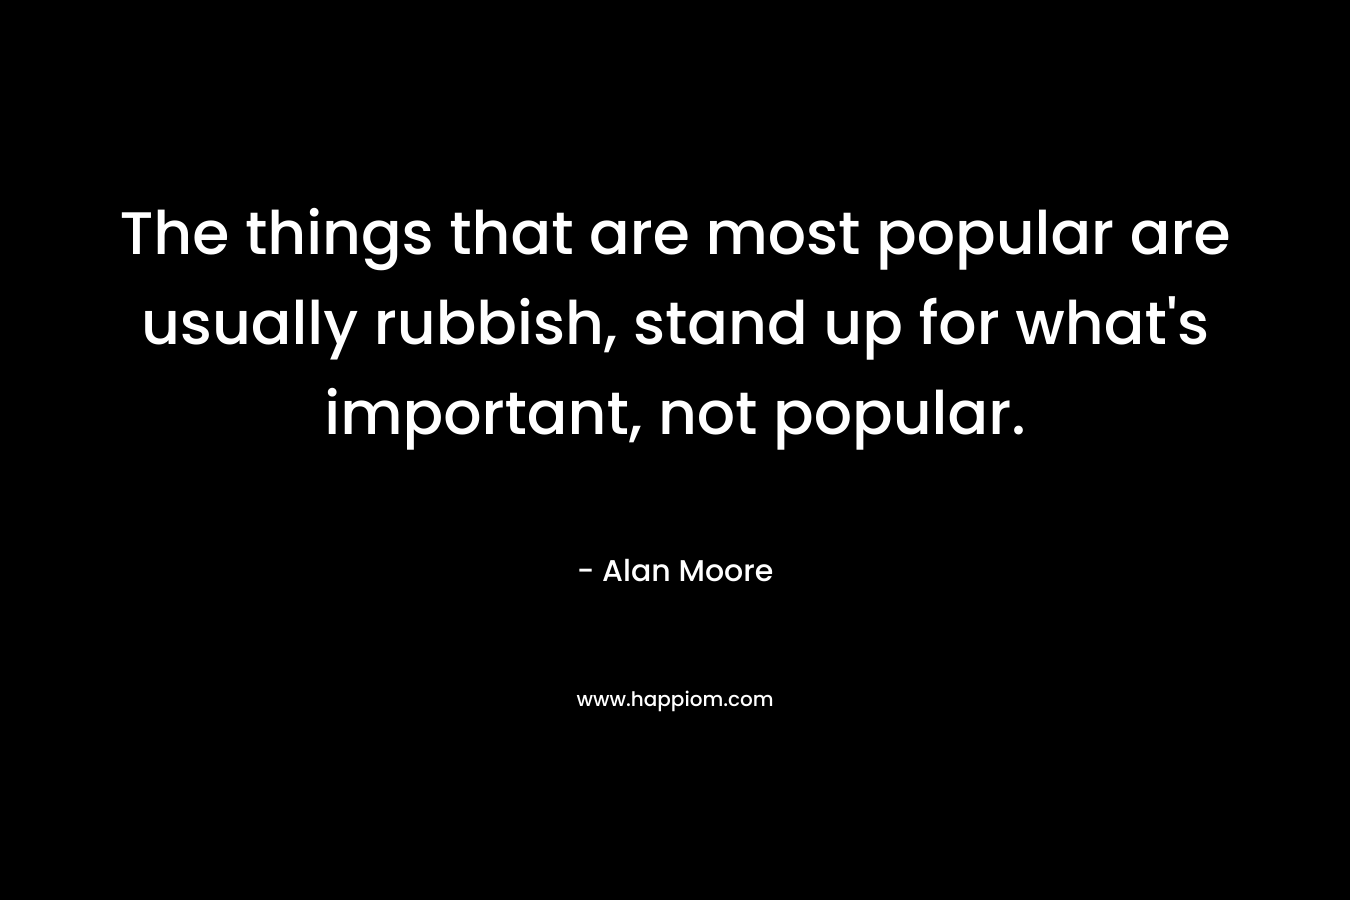 The things that are most popular are usually rubbish, stand up for what's important, not popular.